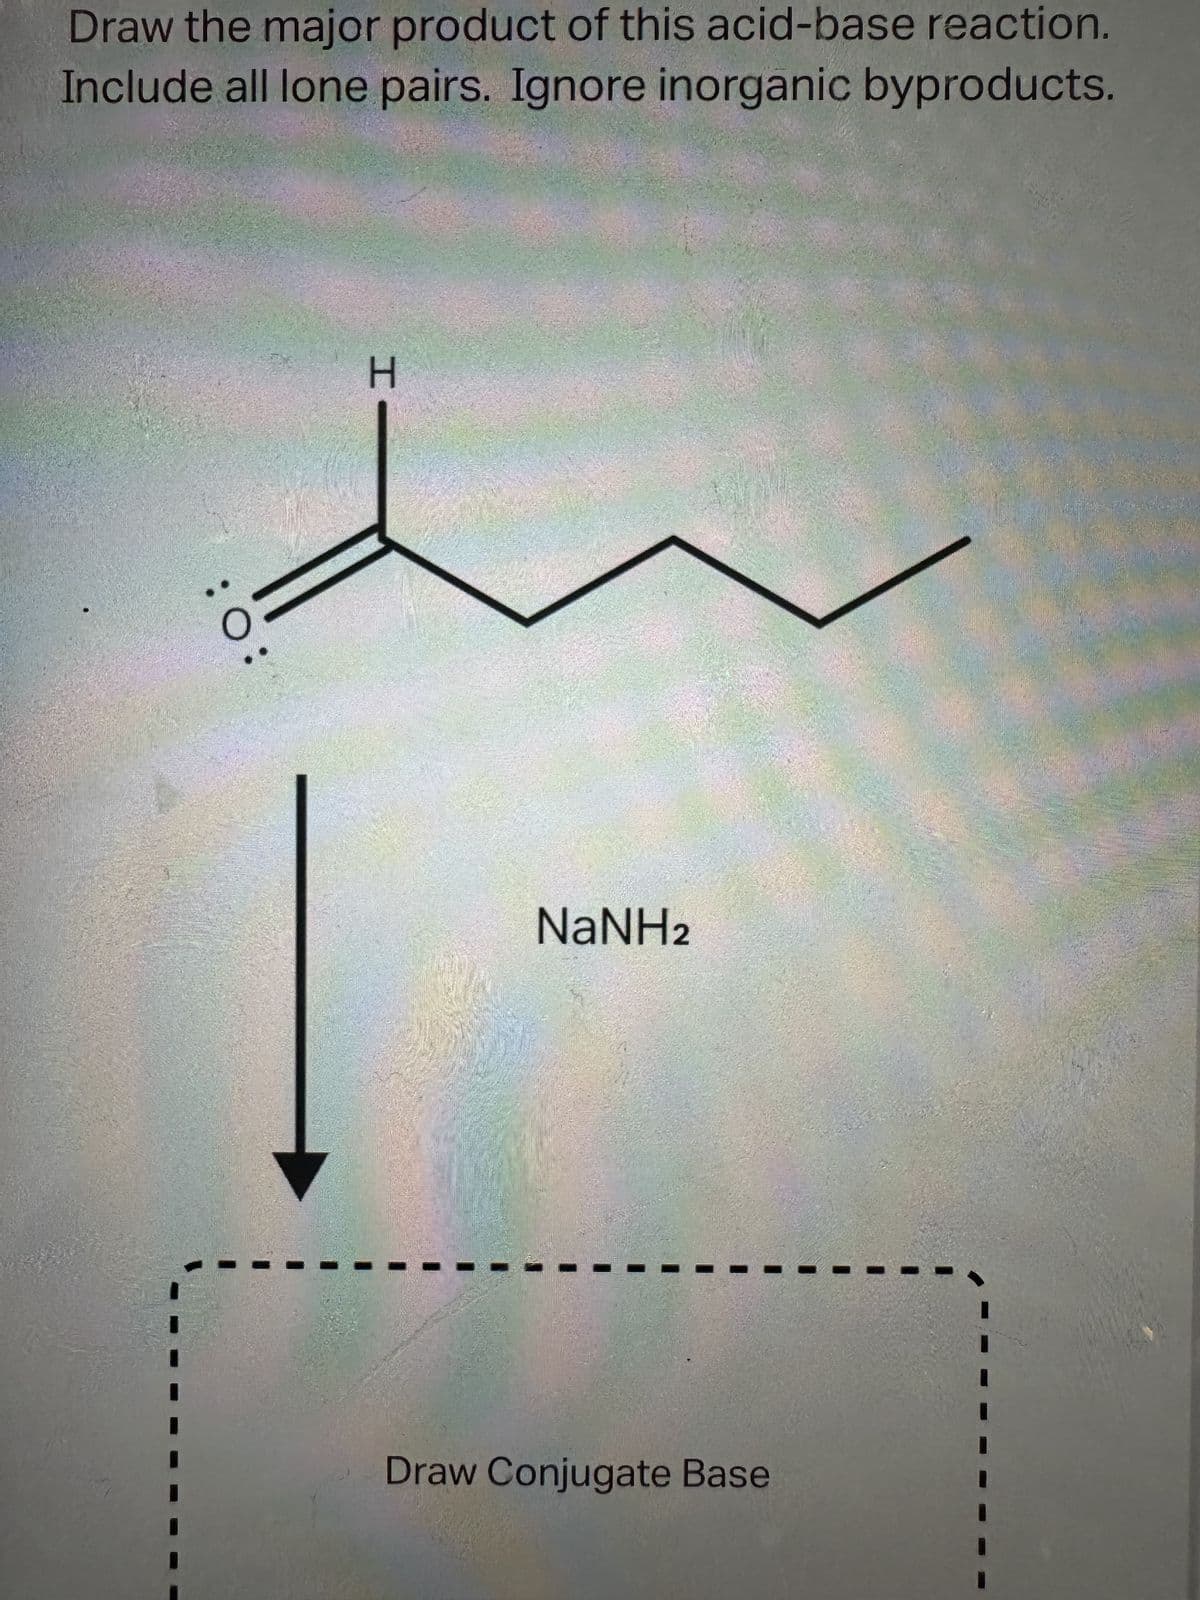 Draw the major product of this acid-base reaction.
Include all lone pairs. Ignore inorganic byproducts.
CO
H
NaNH2
2004
Draw Conjugate Base
";